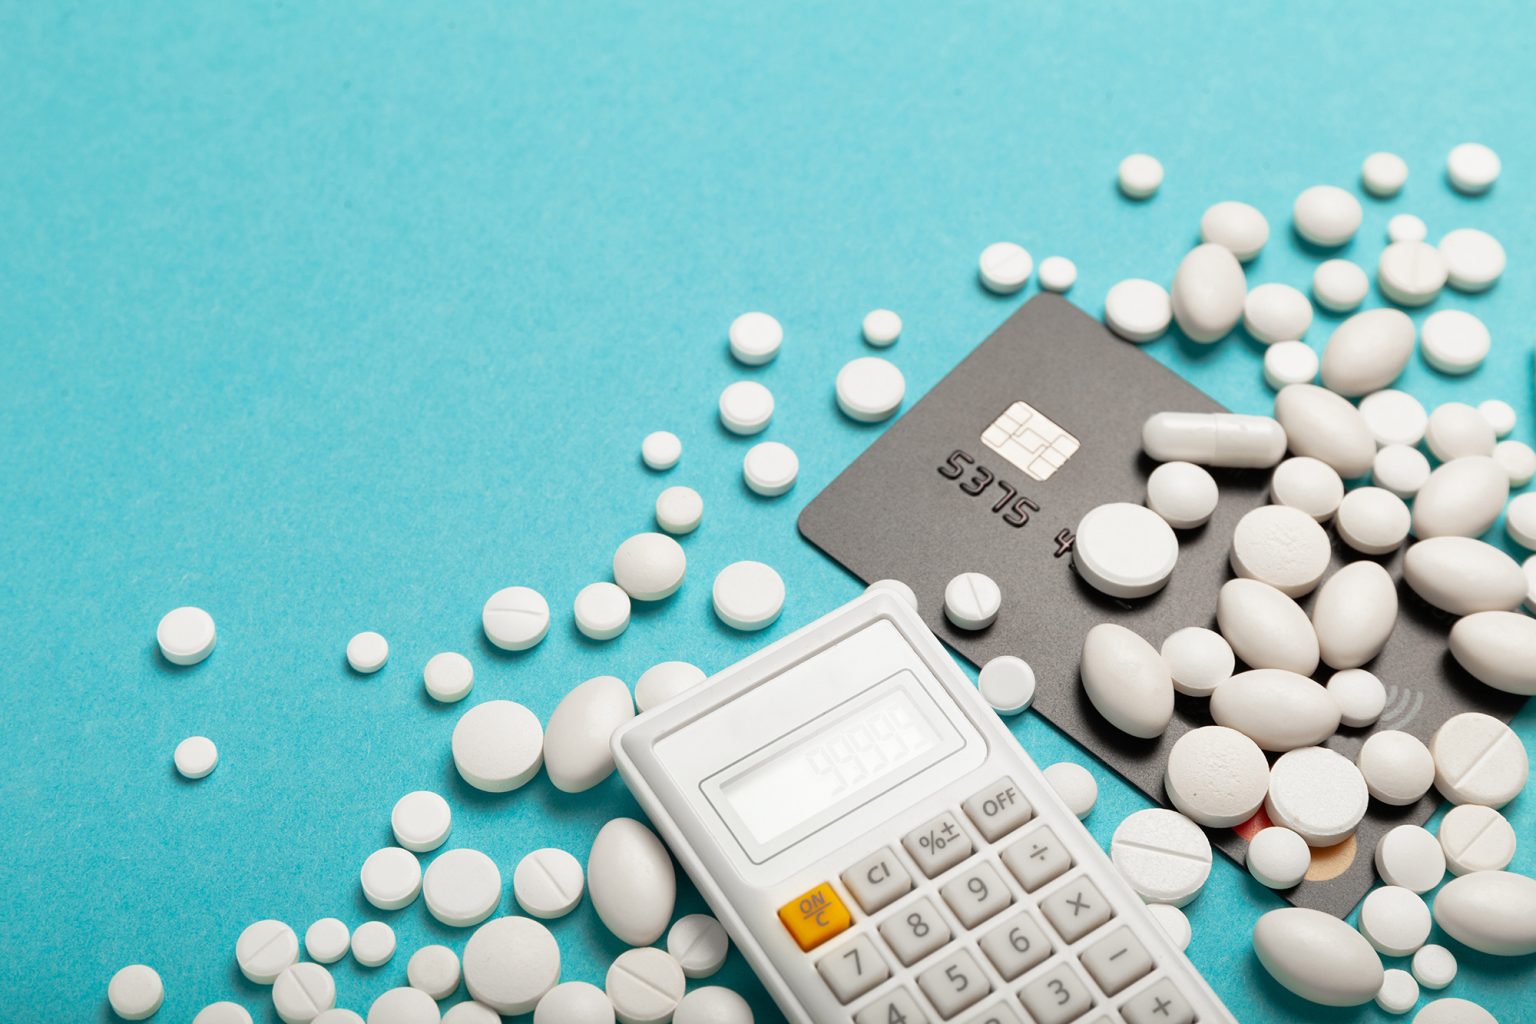 Credit card and medicines (pills) on a blue background